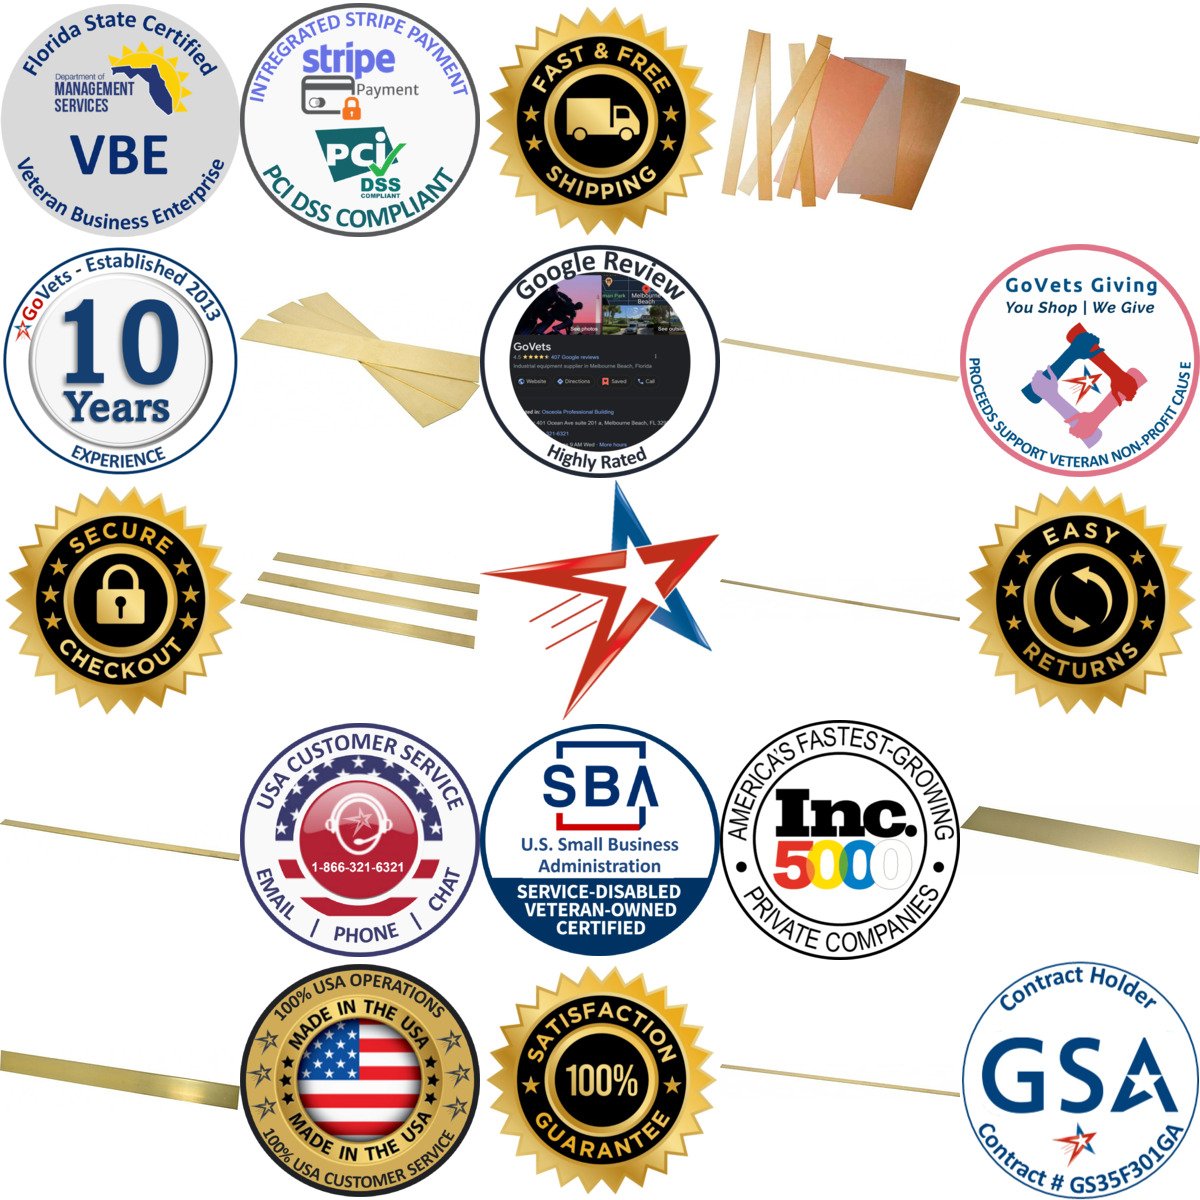 A selection of Brass Strips products on GoVets